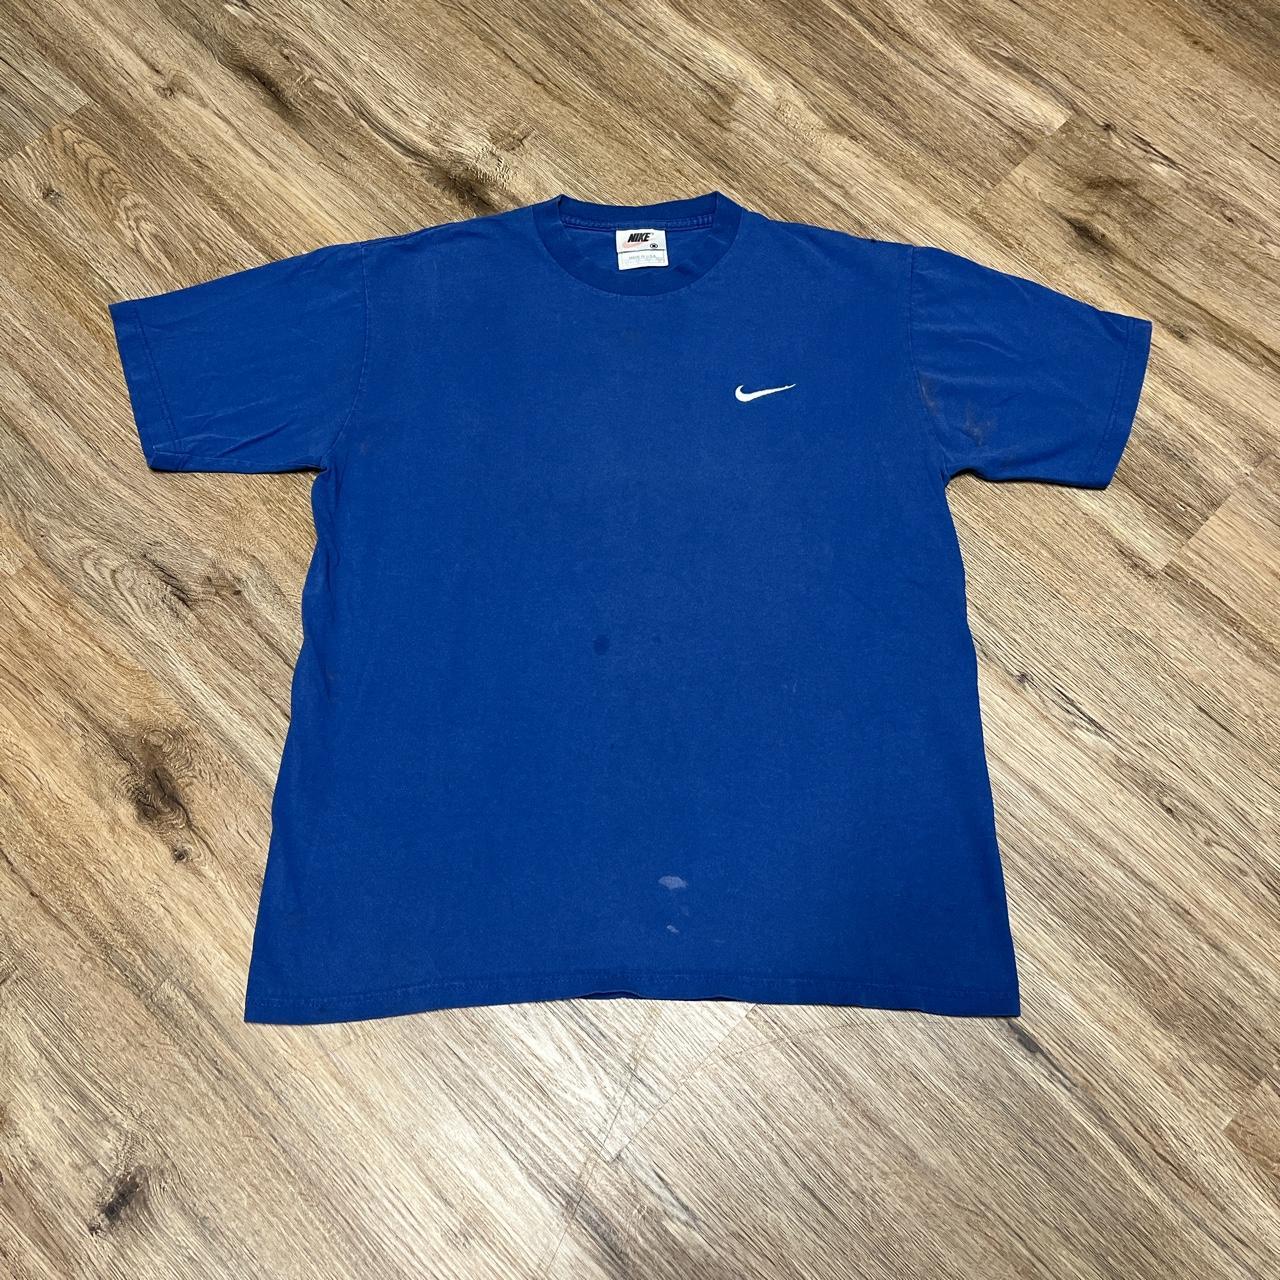 Vintage 1990’s blue Nike tee shirt made in the USA... - Depop